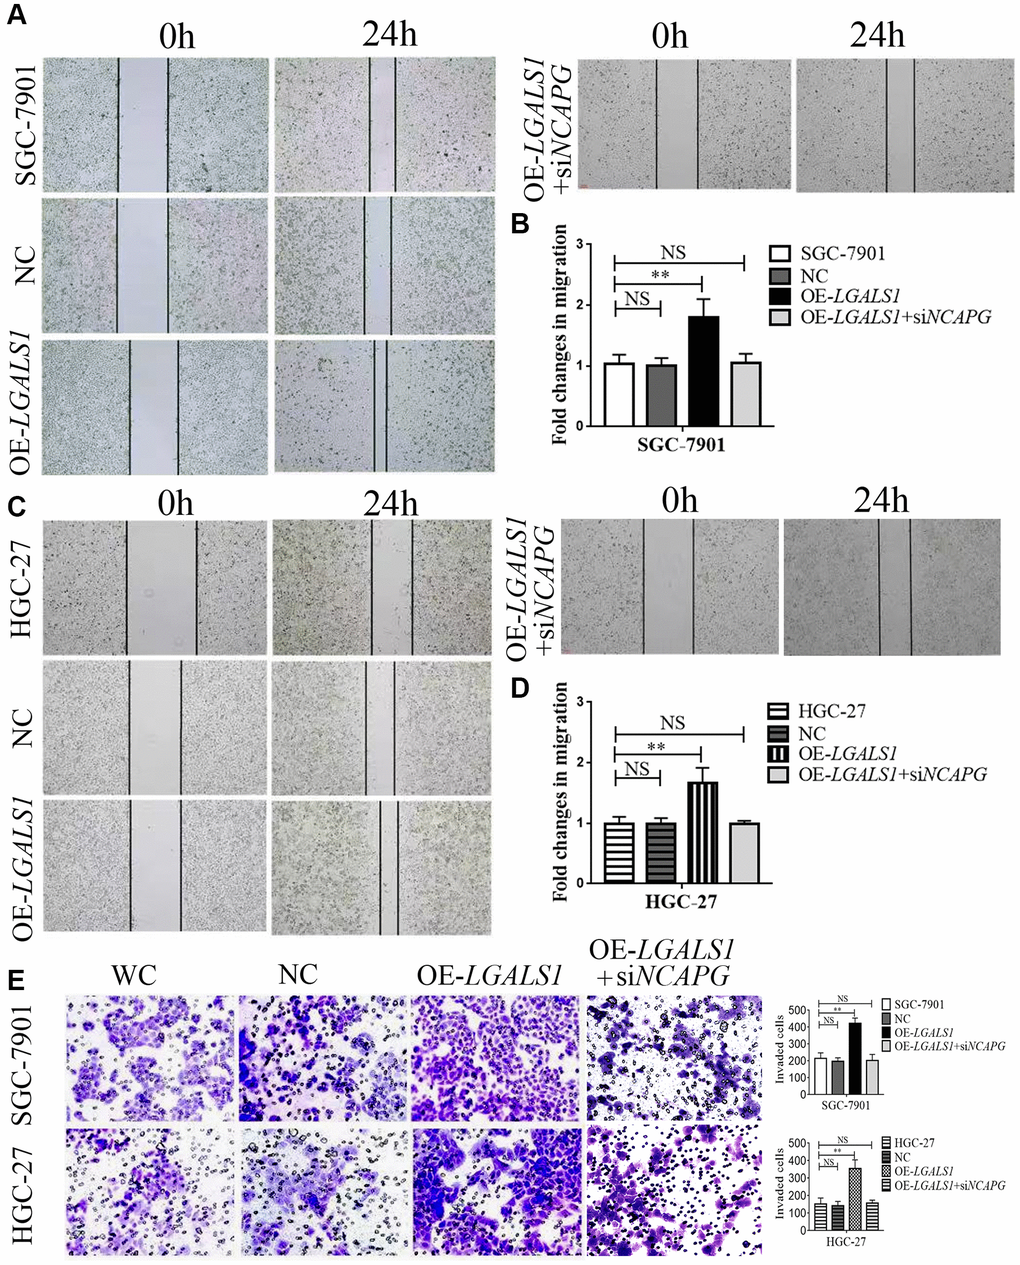 LGALS1 promotes the migration and invasion of GC cell lines in vitro. Overexpression of LGALS1 (OE-LGALS1) significantly enhanced the migration capacity of (A, B) SGC-7901 and (C, D) HGC-27 cells compared with wild control (WC) and negative controls (NC). The migration capacity was abolished when NCAPG was simultaneously silenced. Magnification: ×100. (E) Transwell assay showing that overexpressed LGALS1 significantly enhanced the invasion ability of SGC-7901 and HGC-27 cells, and simultaneous silencing of NCAPG abolished the invasion capacity (n = 3). Magnification: ×200. Abbreviations: NC: negative control (empty vector); OE-LGALS1: Overexpression LGALS1; OE-LGALS1+siNCAPG: Overexpression of LGALS1 +silencing of NCAPG. NS: not significant. **P 